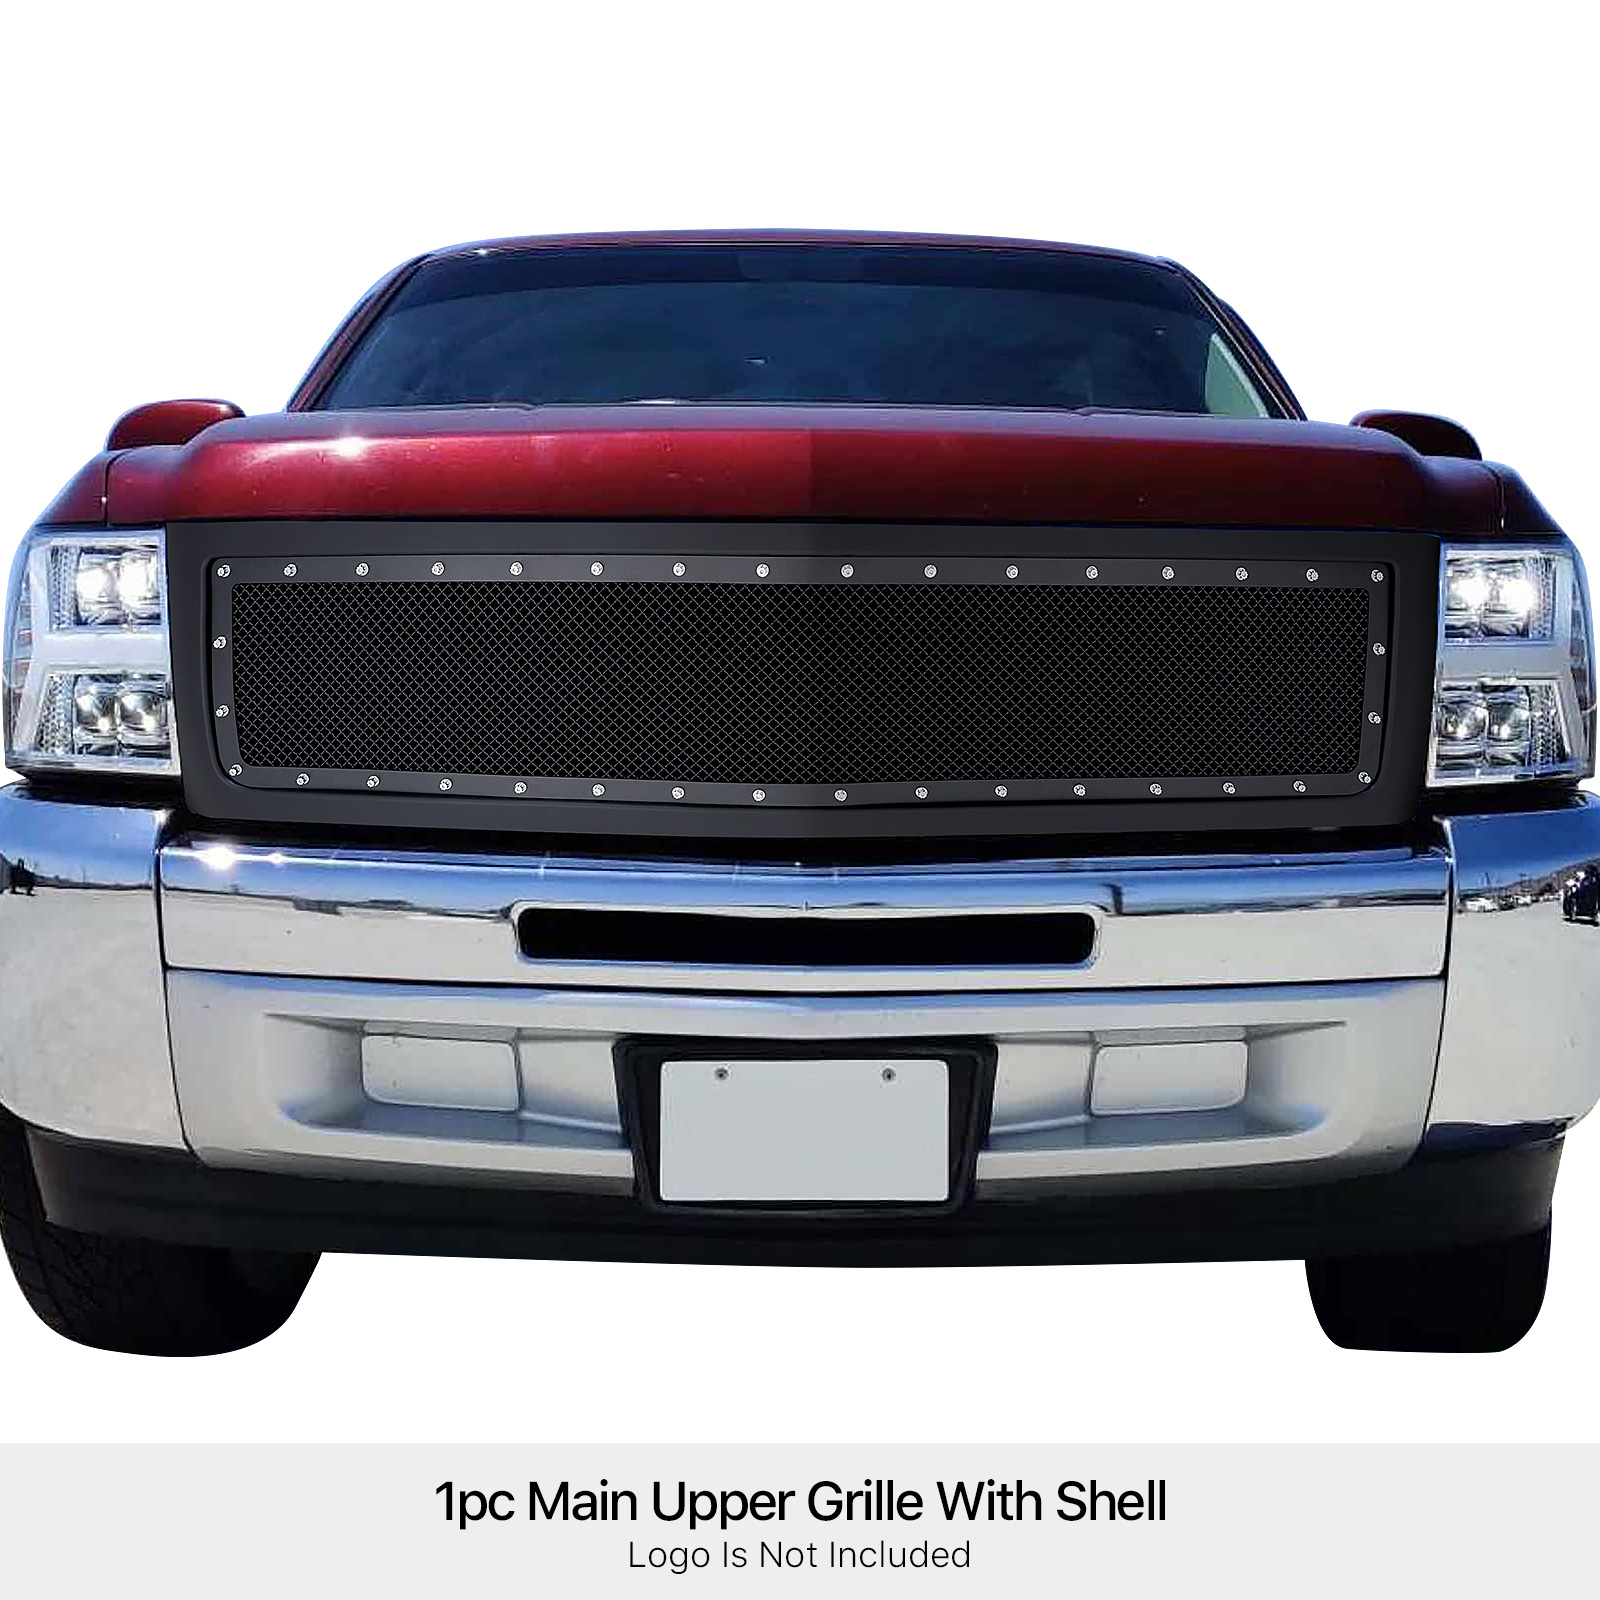 2007-2013 Chevy Silverado 1500 (only for models with logo height exceeding center bar) MAIN UPPER Package Grille